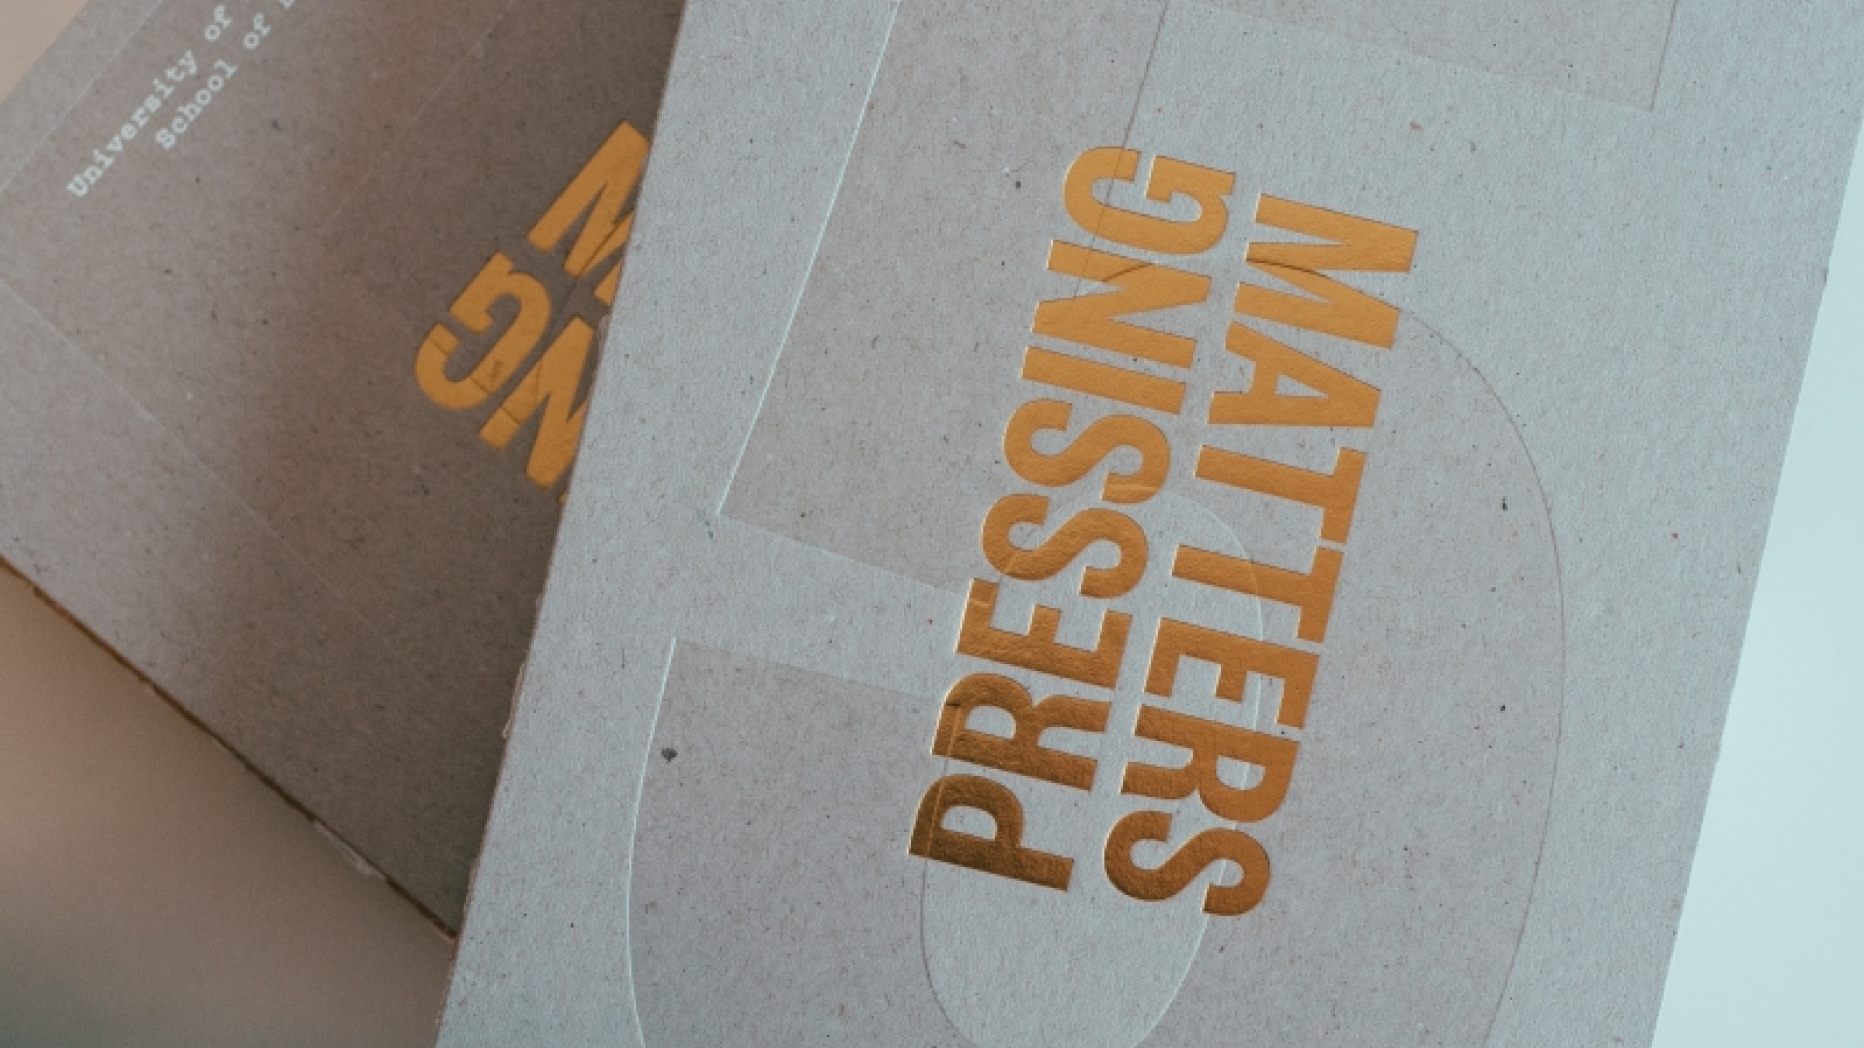 Two copies of pressing matters 5